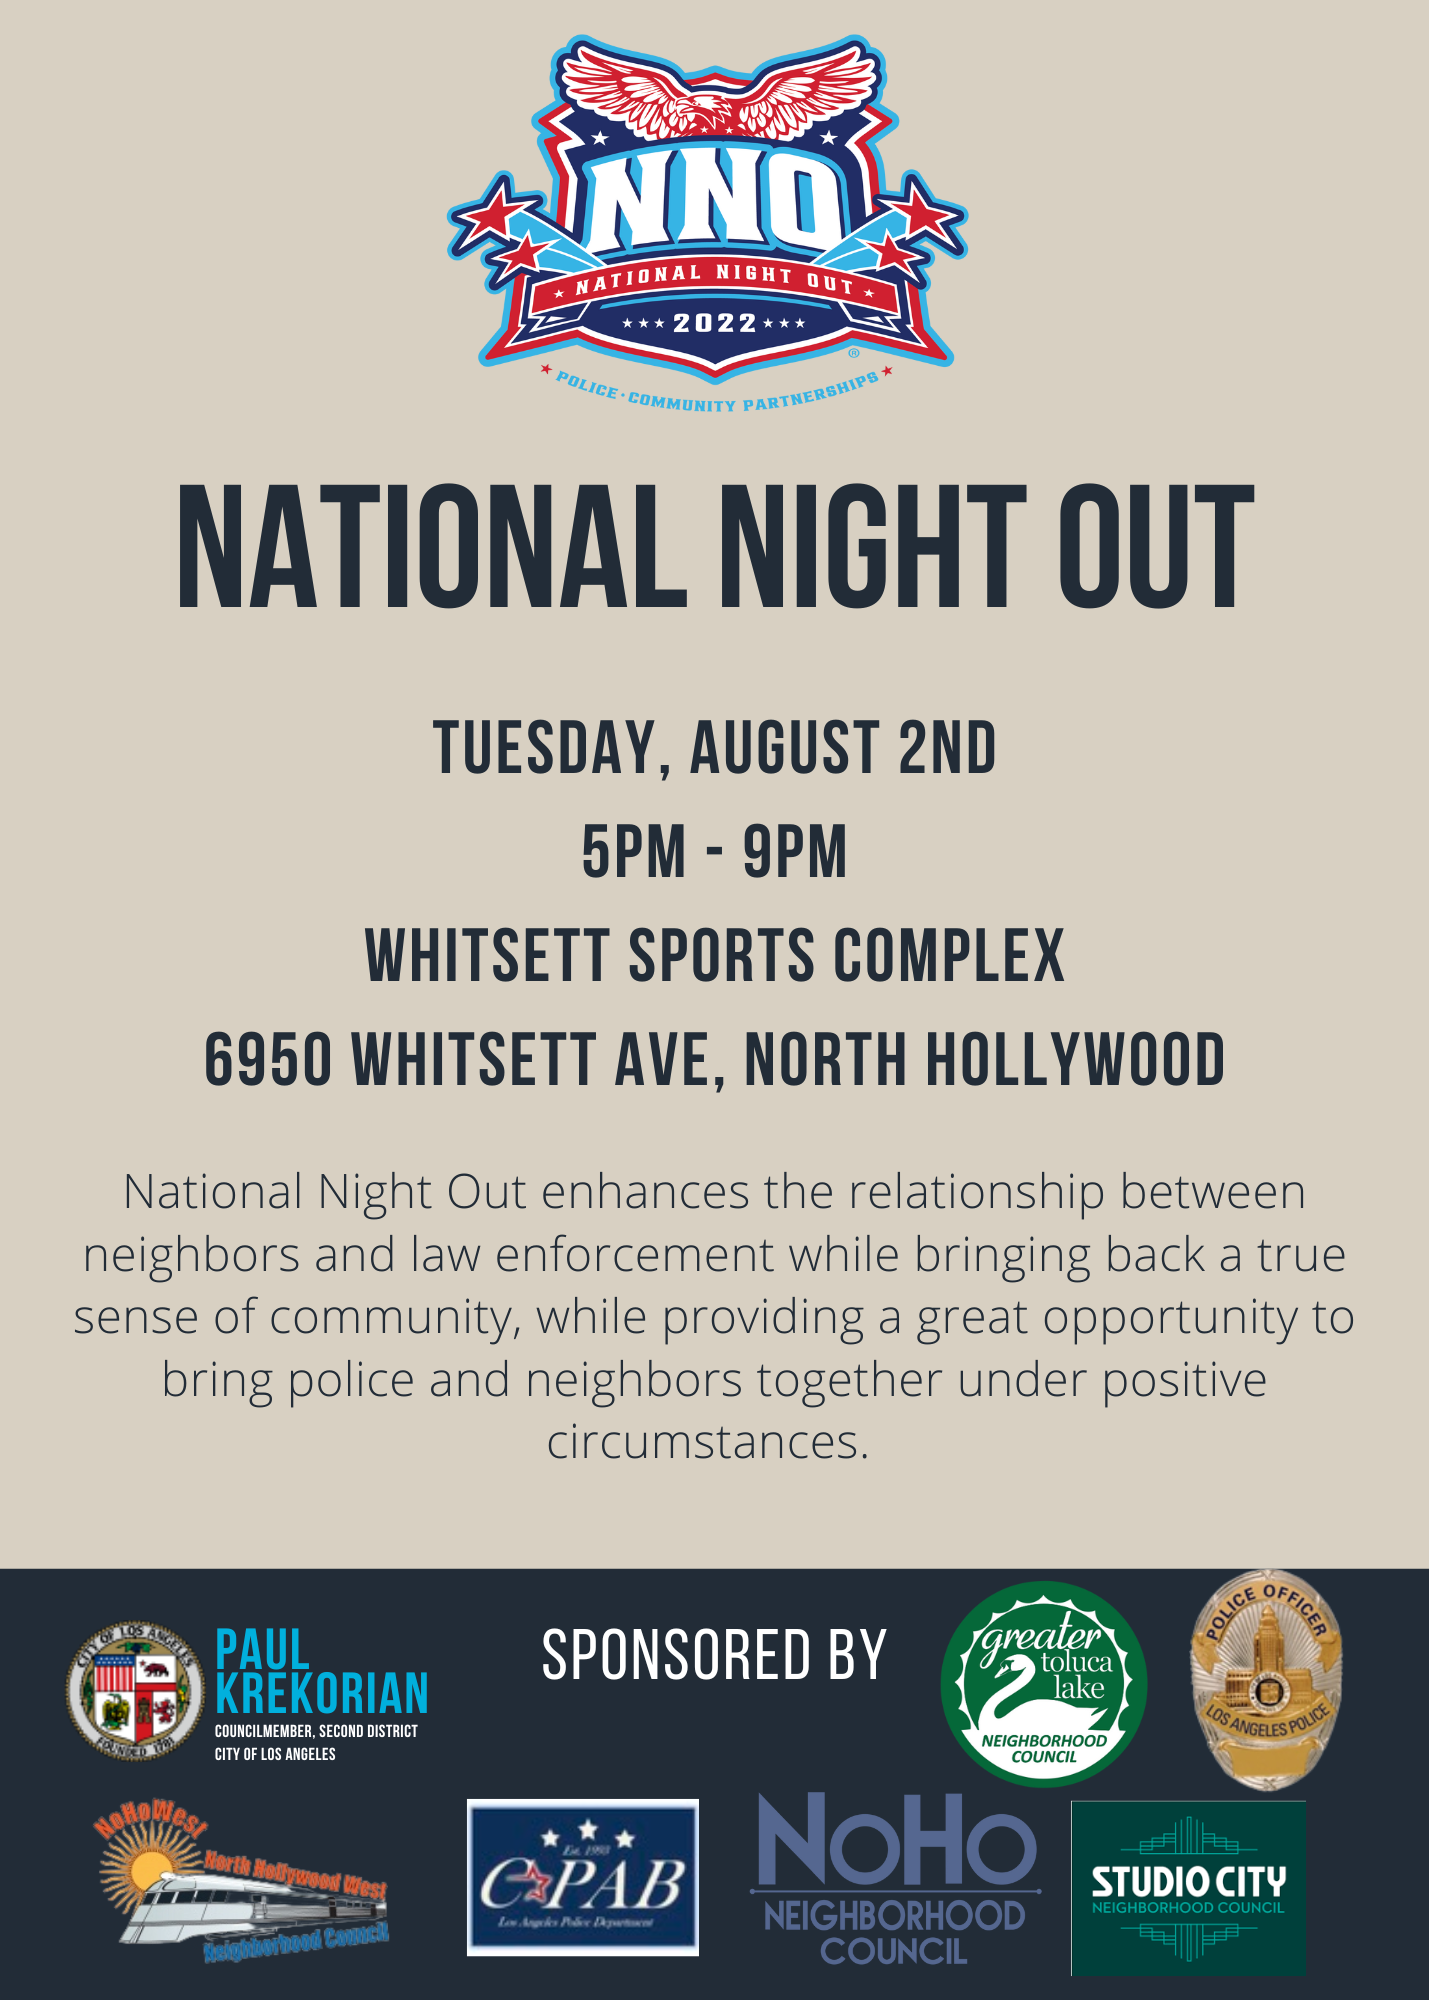 National Night Out Tuesday August 2nd